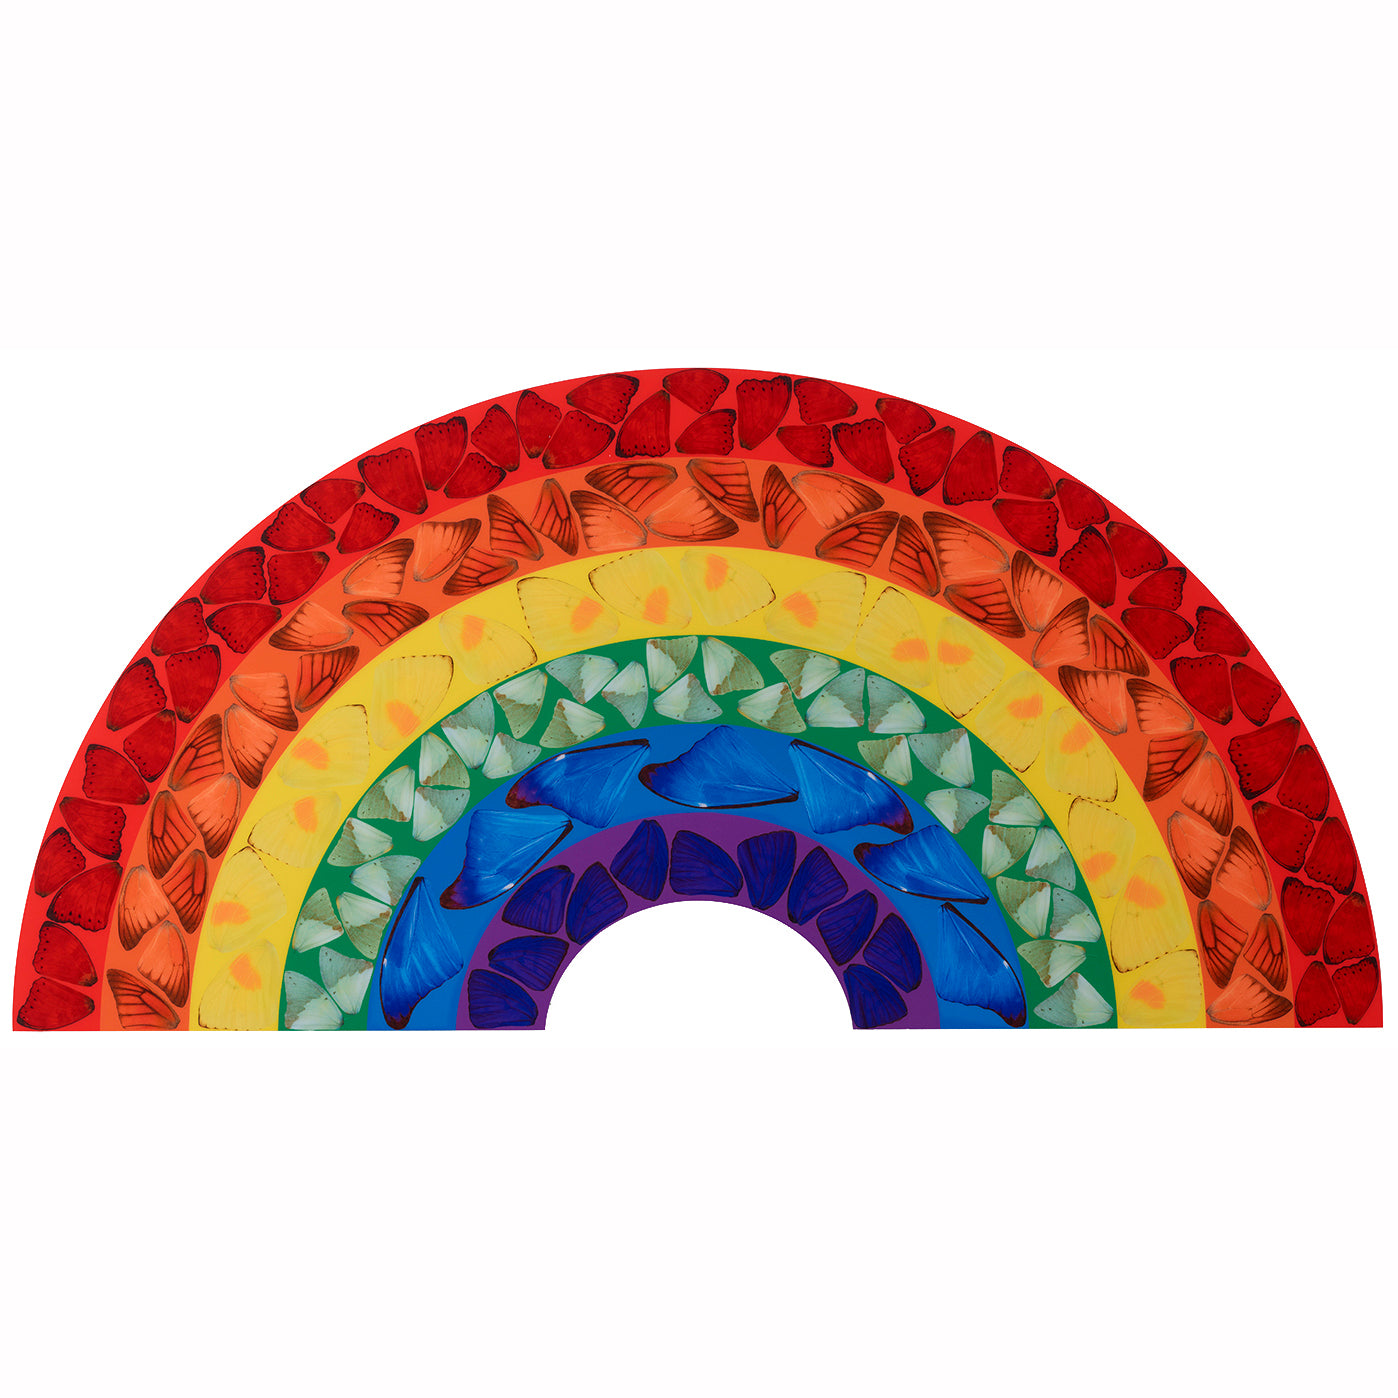 HENI H7-1 BUTTERFLY RAINBOW LARGE BY DAMIEN HIRST - [3whitedots]